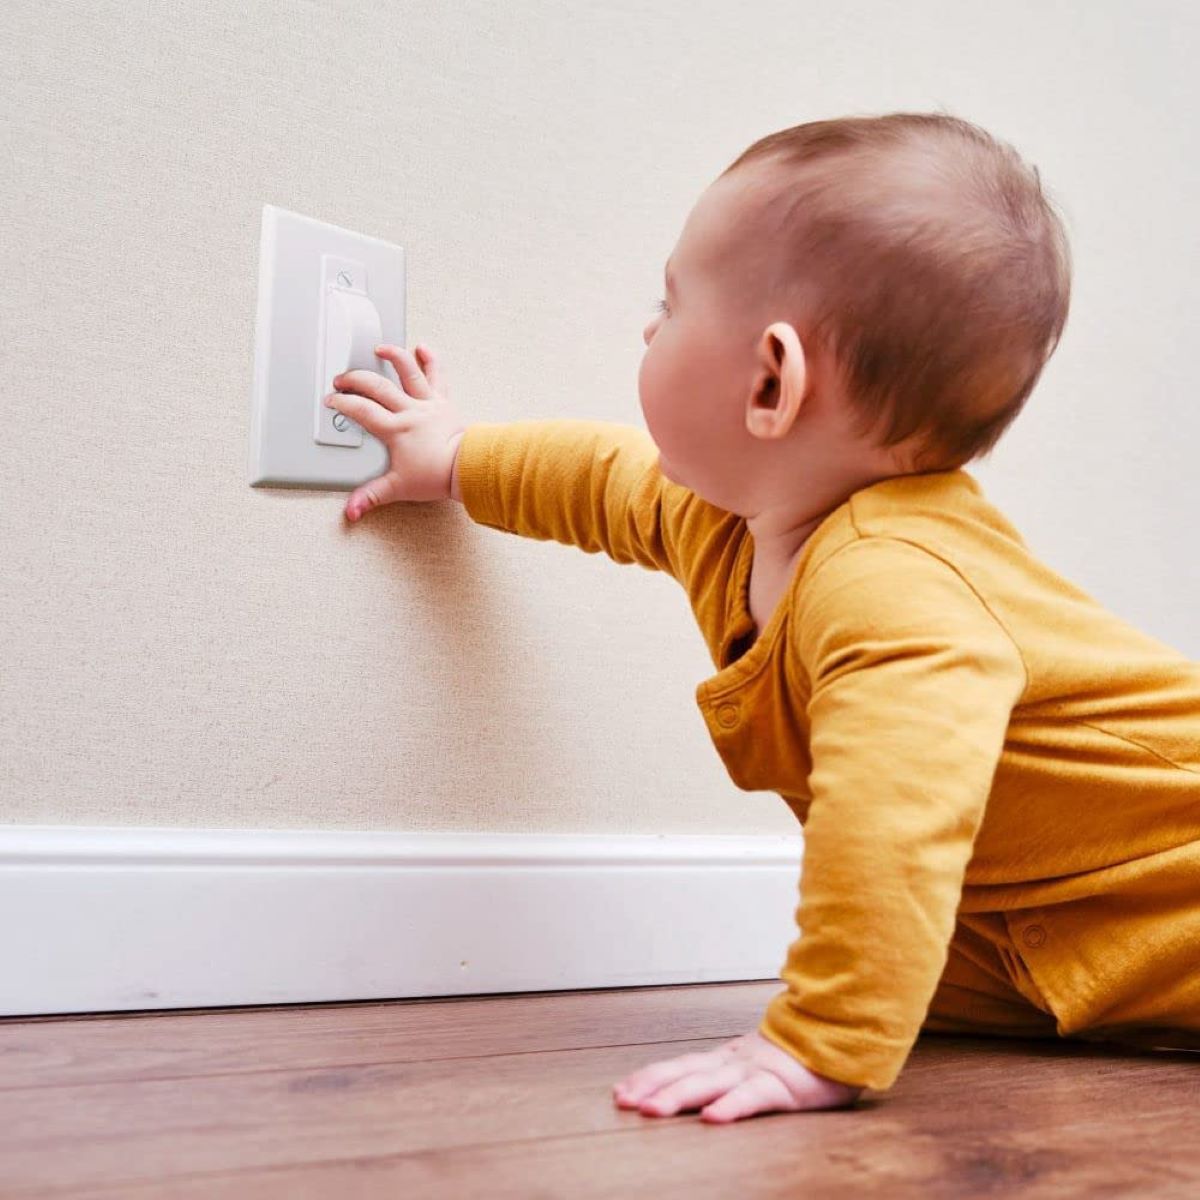 How To Childproof A Light Switch